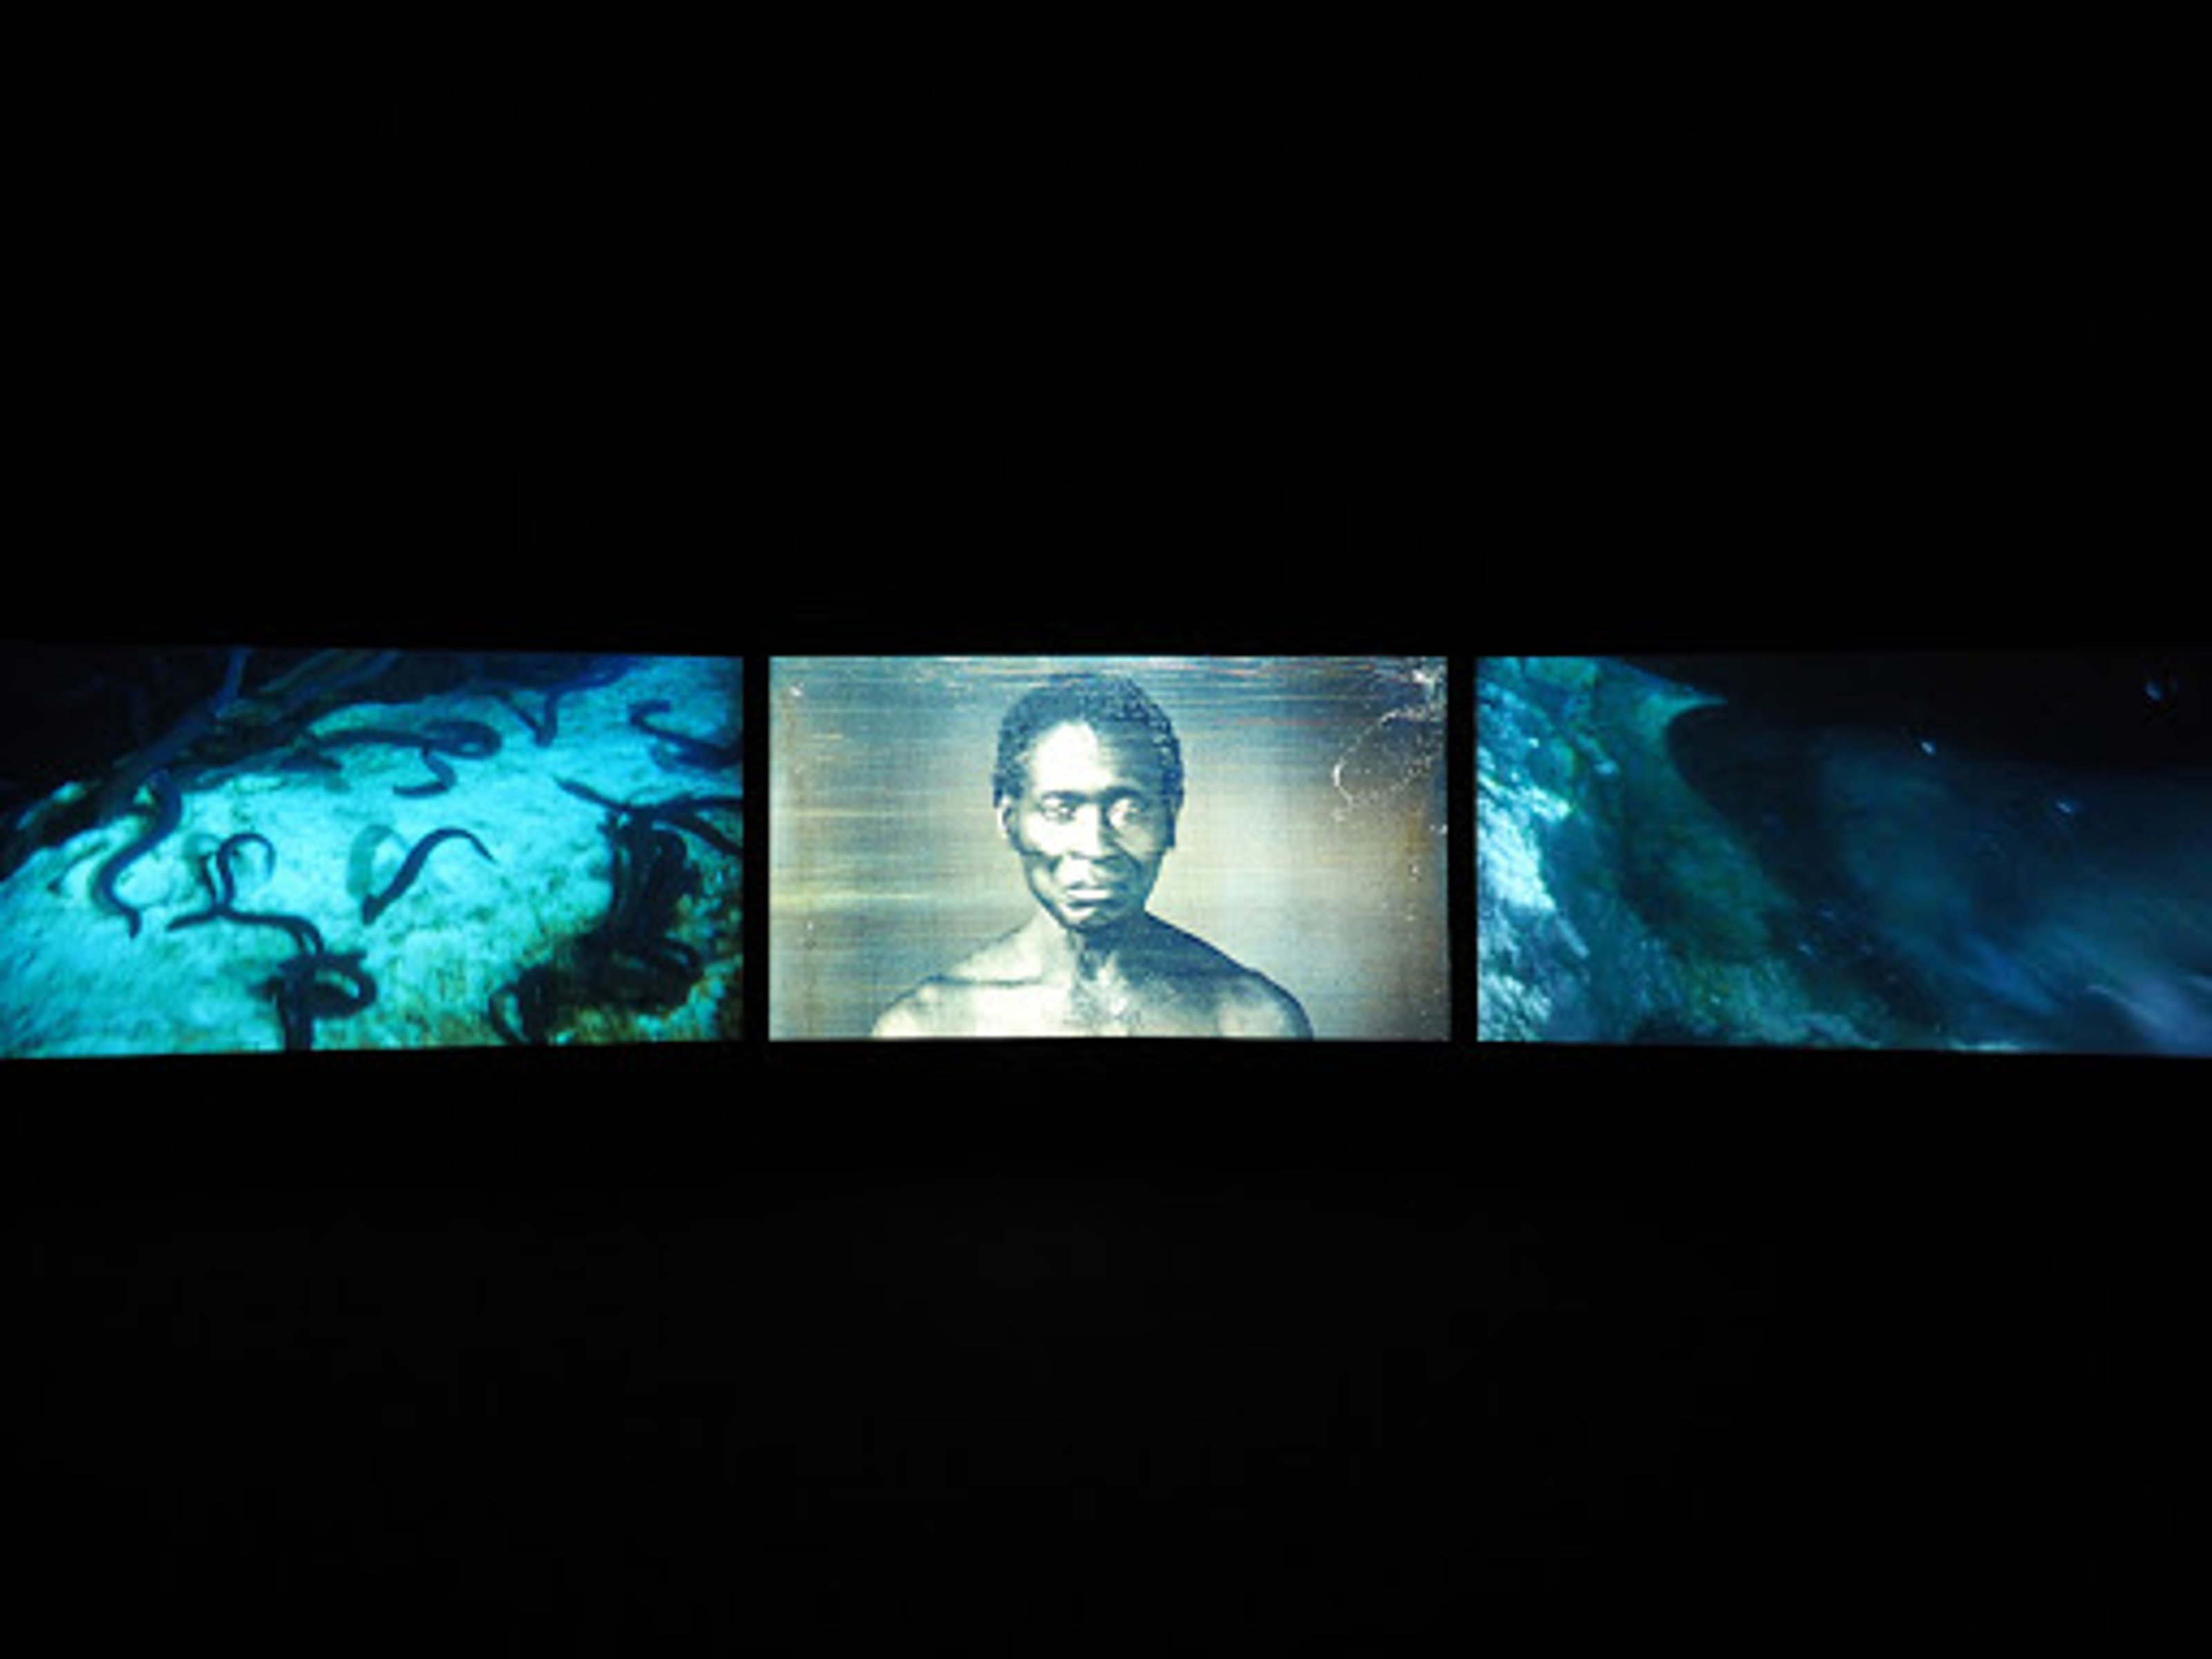 Video on three screens horizontally arranged. On the left and right screen are images of the ocean floor. At the center, an old photograph of an African person